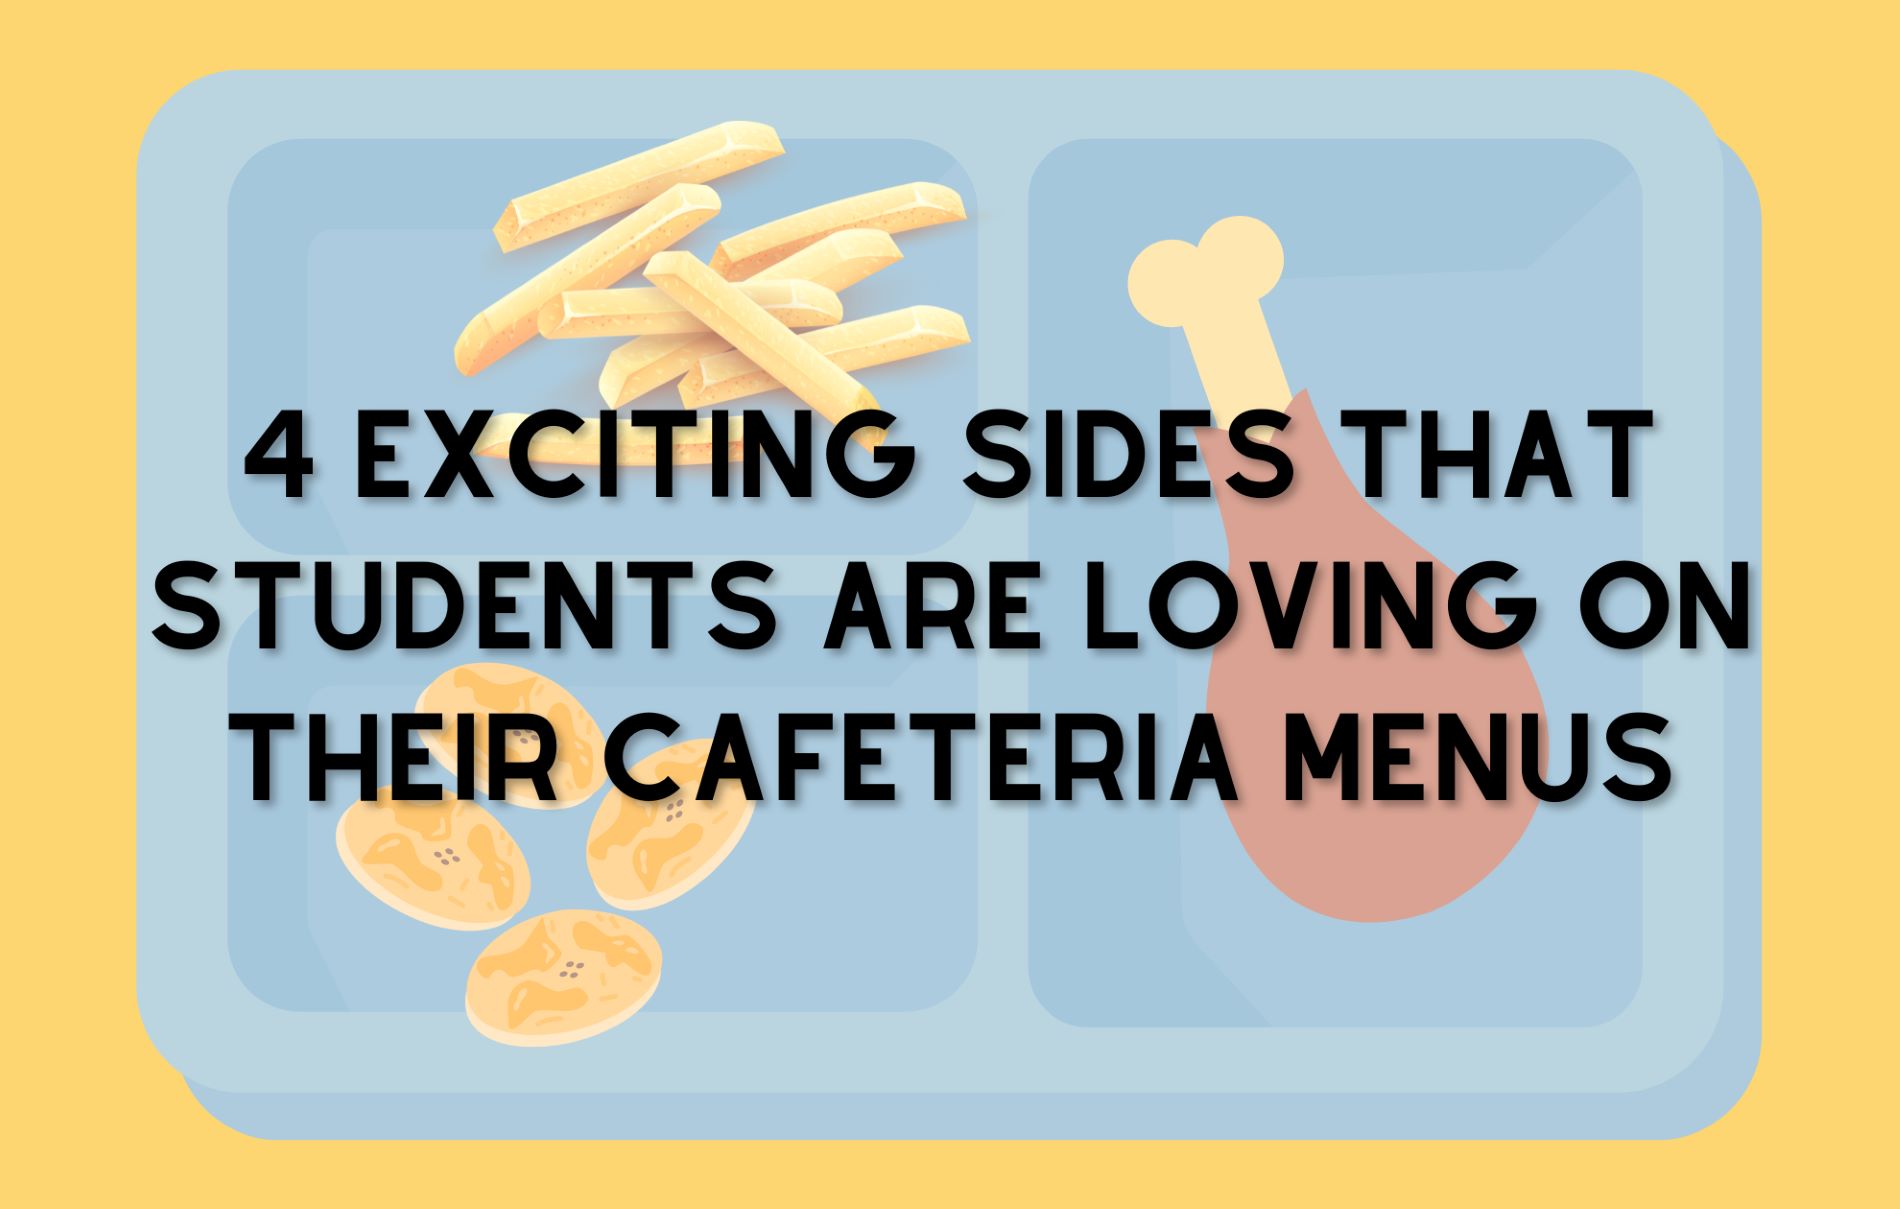 4 Exciting Sides that Students are Loving on their Cafeteria Menus